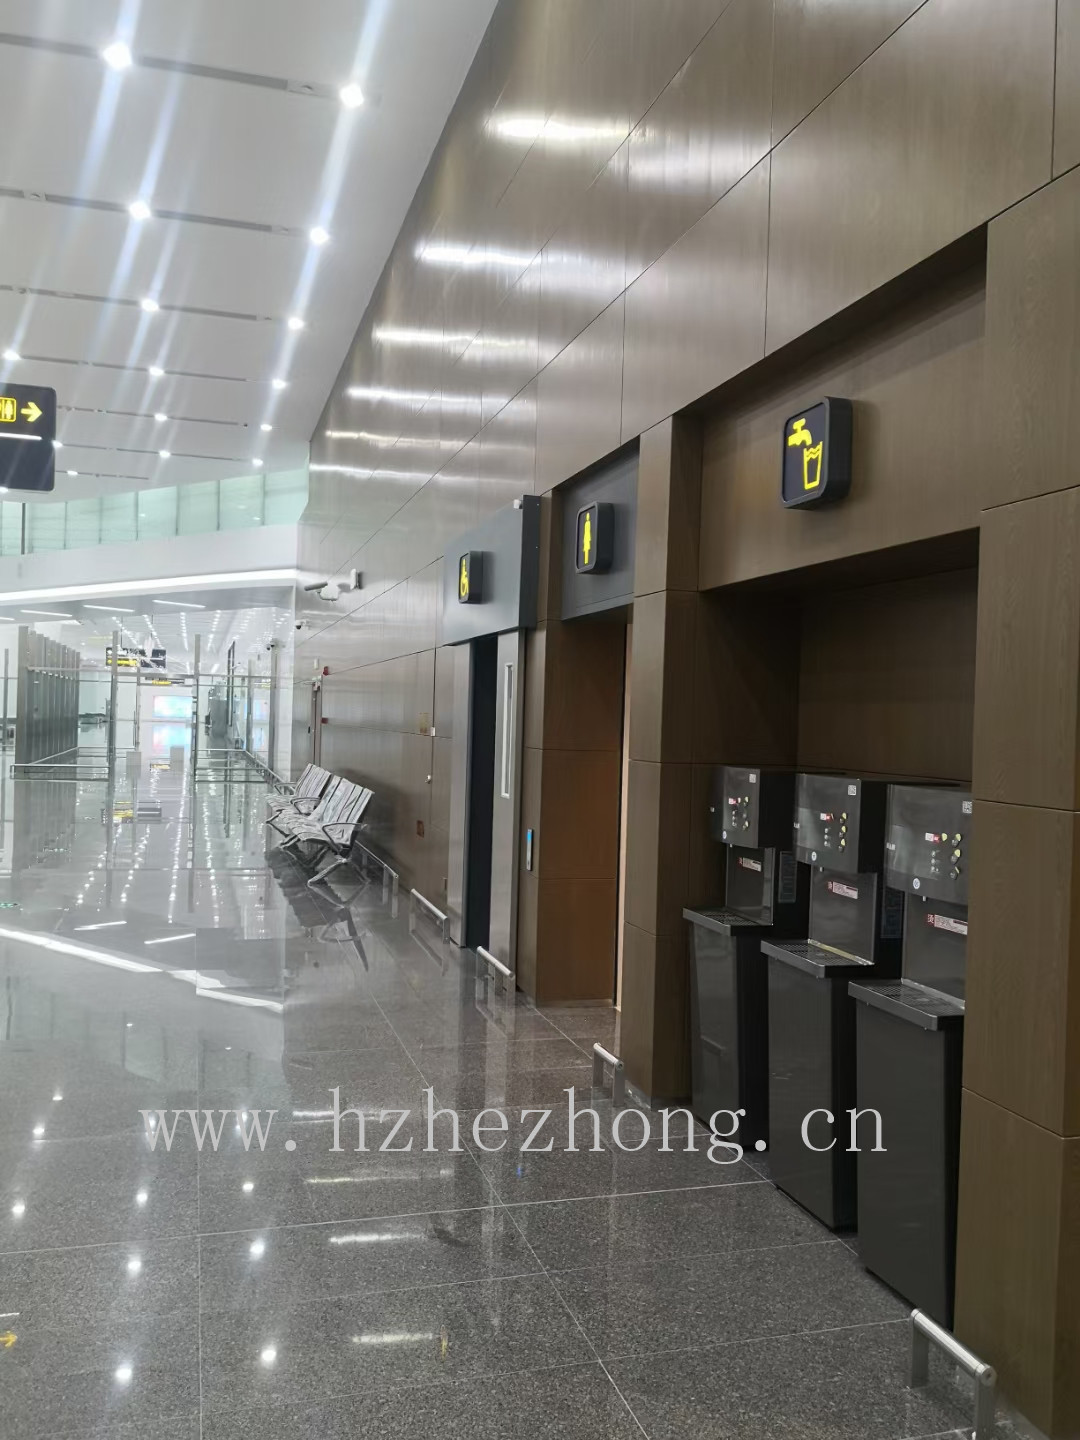 Straight water dispenser what brand is best Qingdao jiaodong international airport use he numerous c